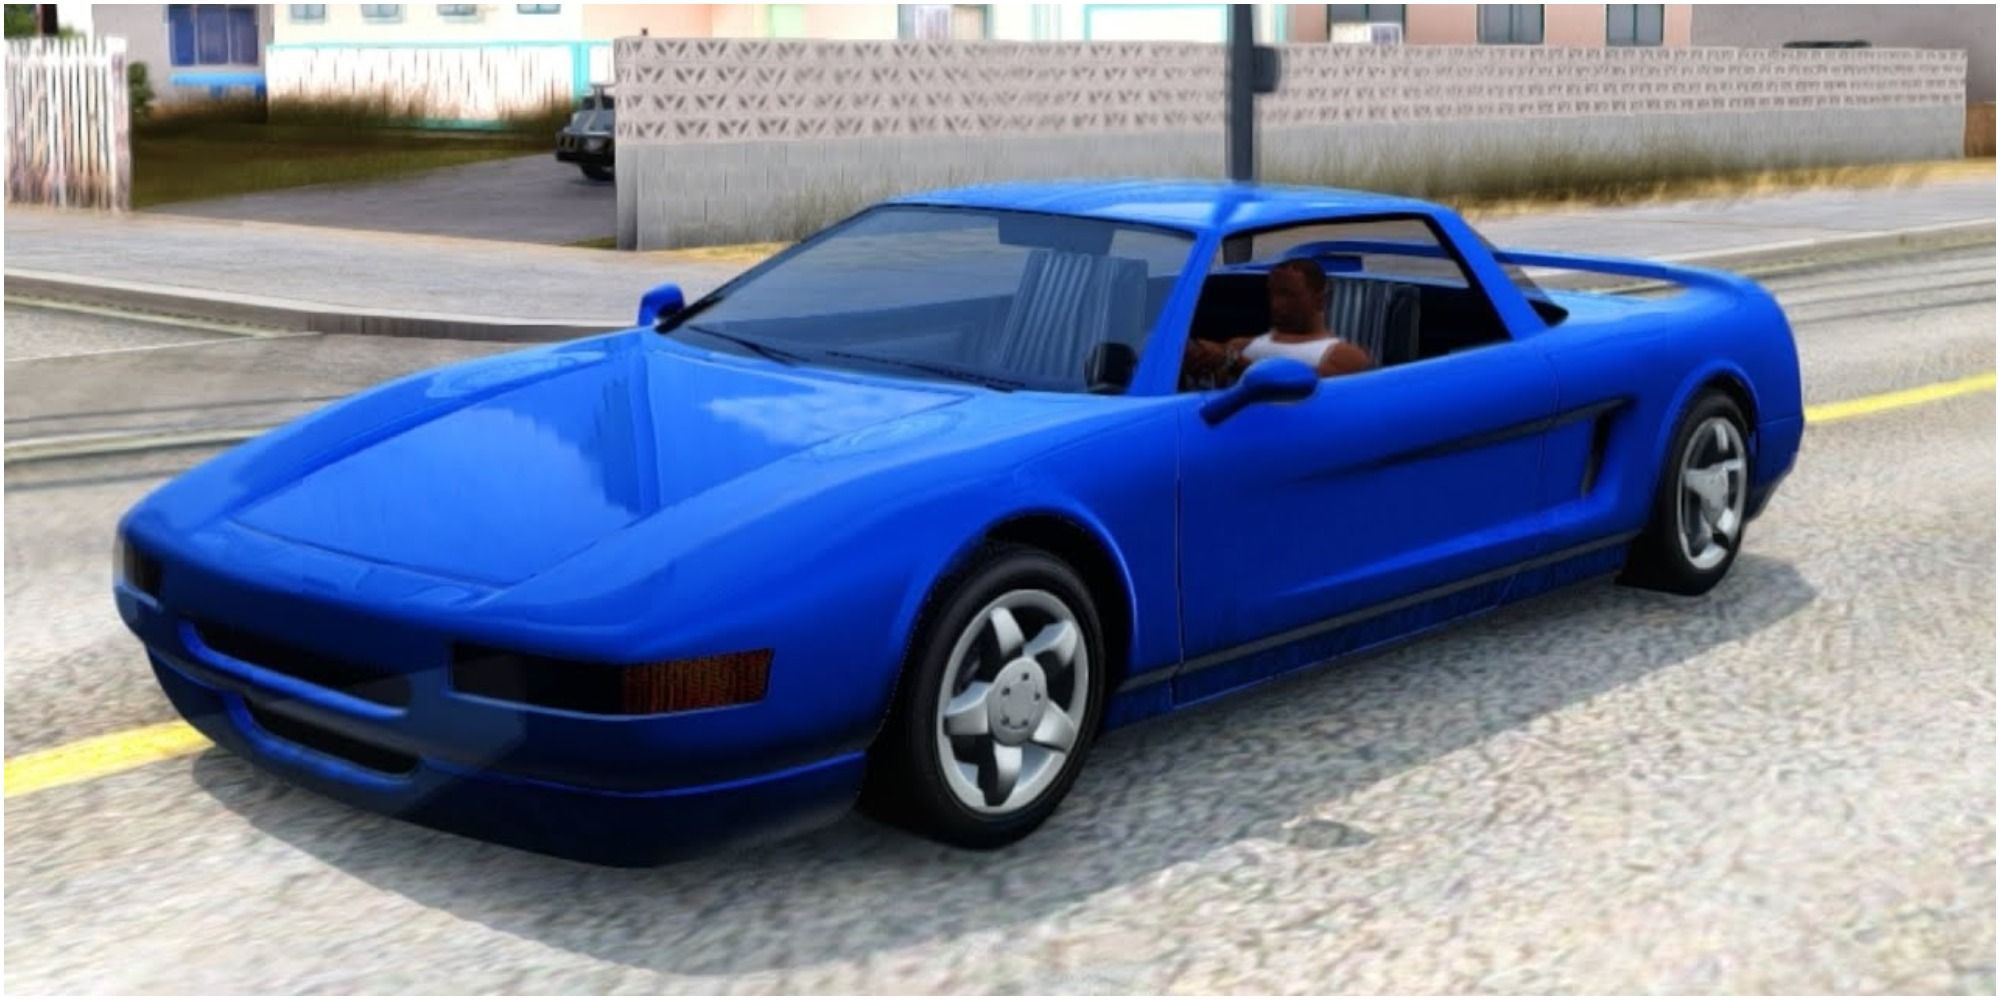 10 Fastest Cars In Grand Theft Auto: San Andreas, Ranked